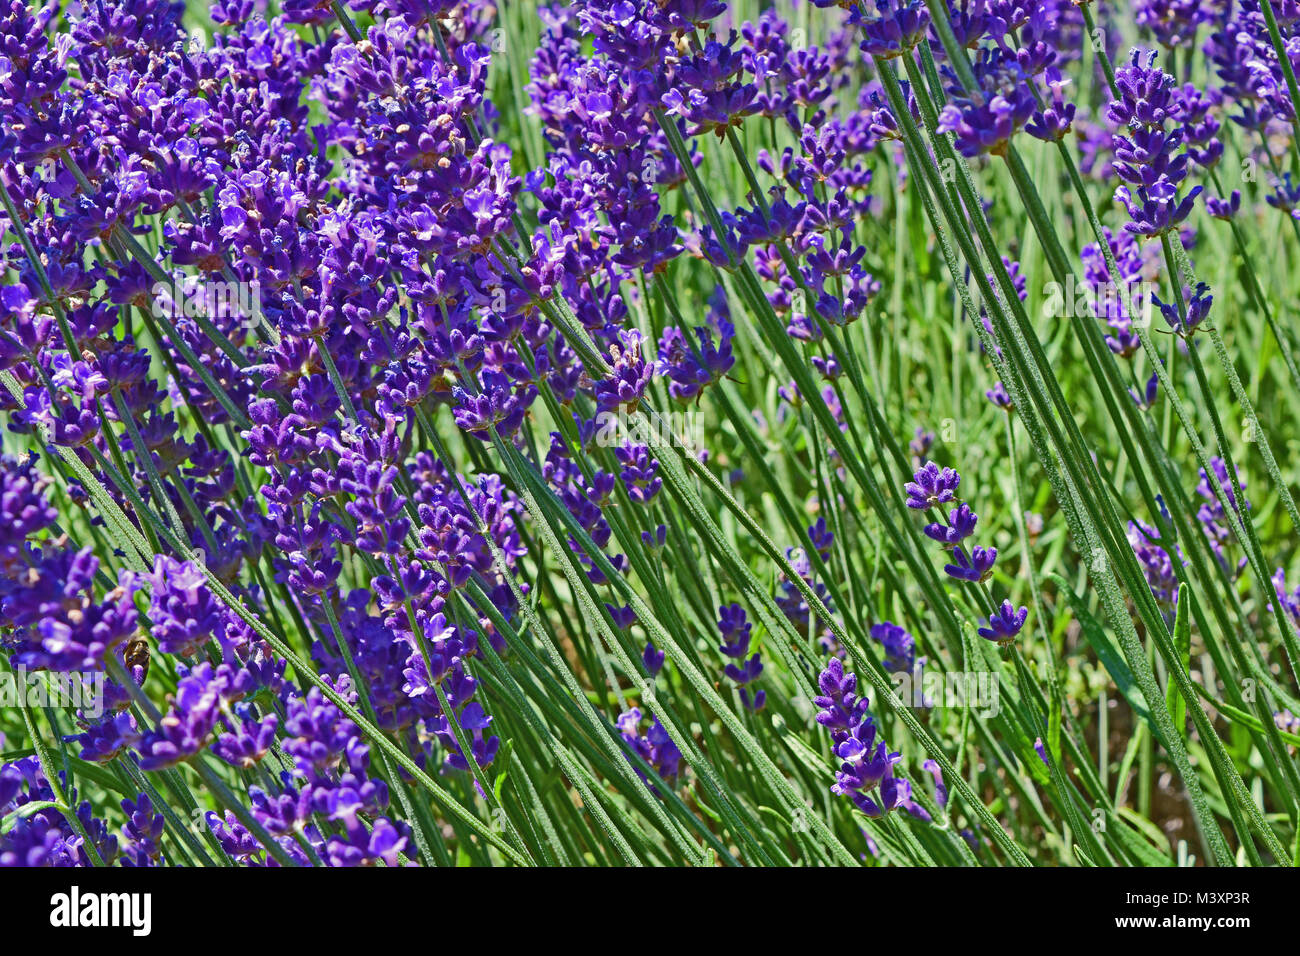 Close up ultra violet lavender blooming in a field. Lavandula angustifolia. Stock Photo